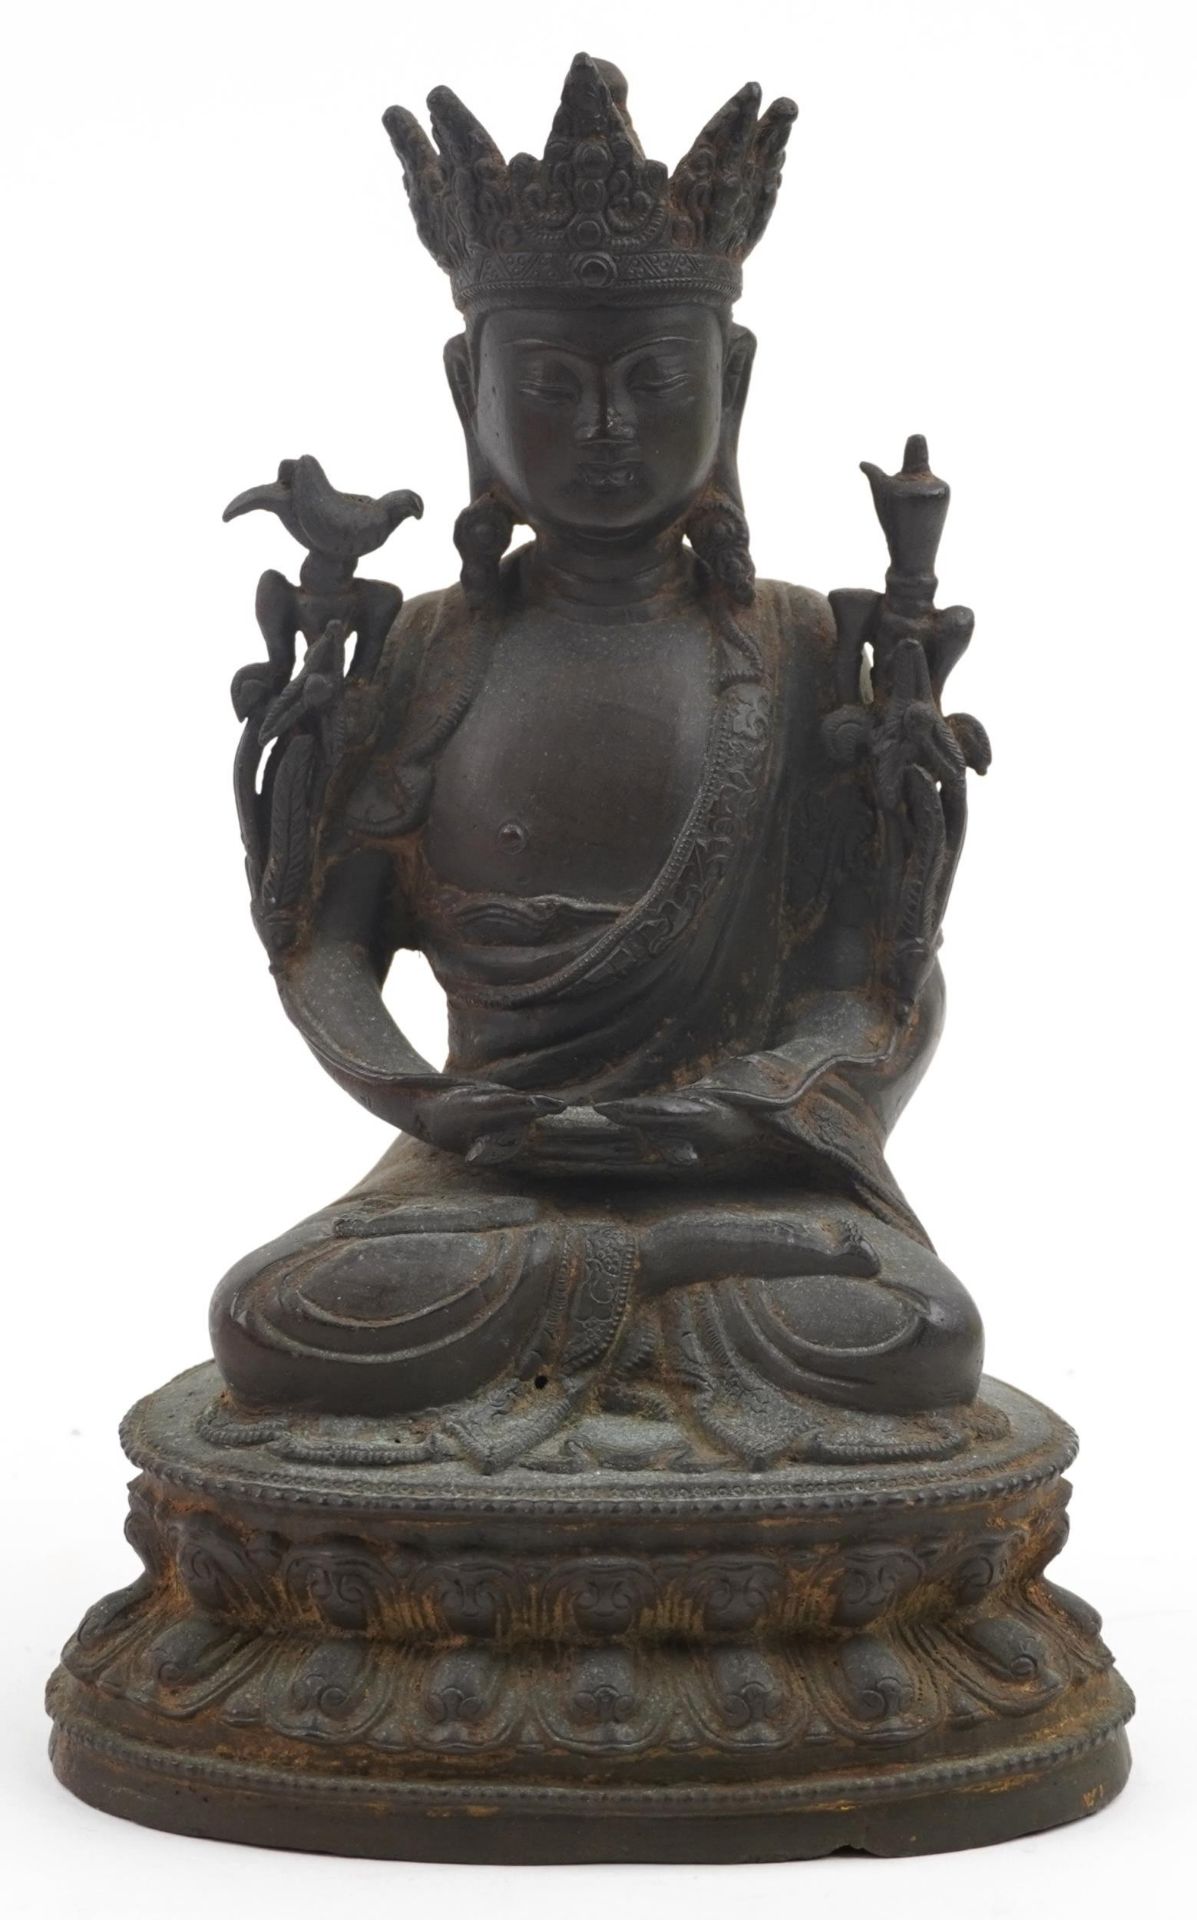 18th Century Chino Tibetan bronze buddha, 20cms tall : For further information on this lot please